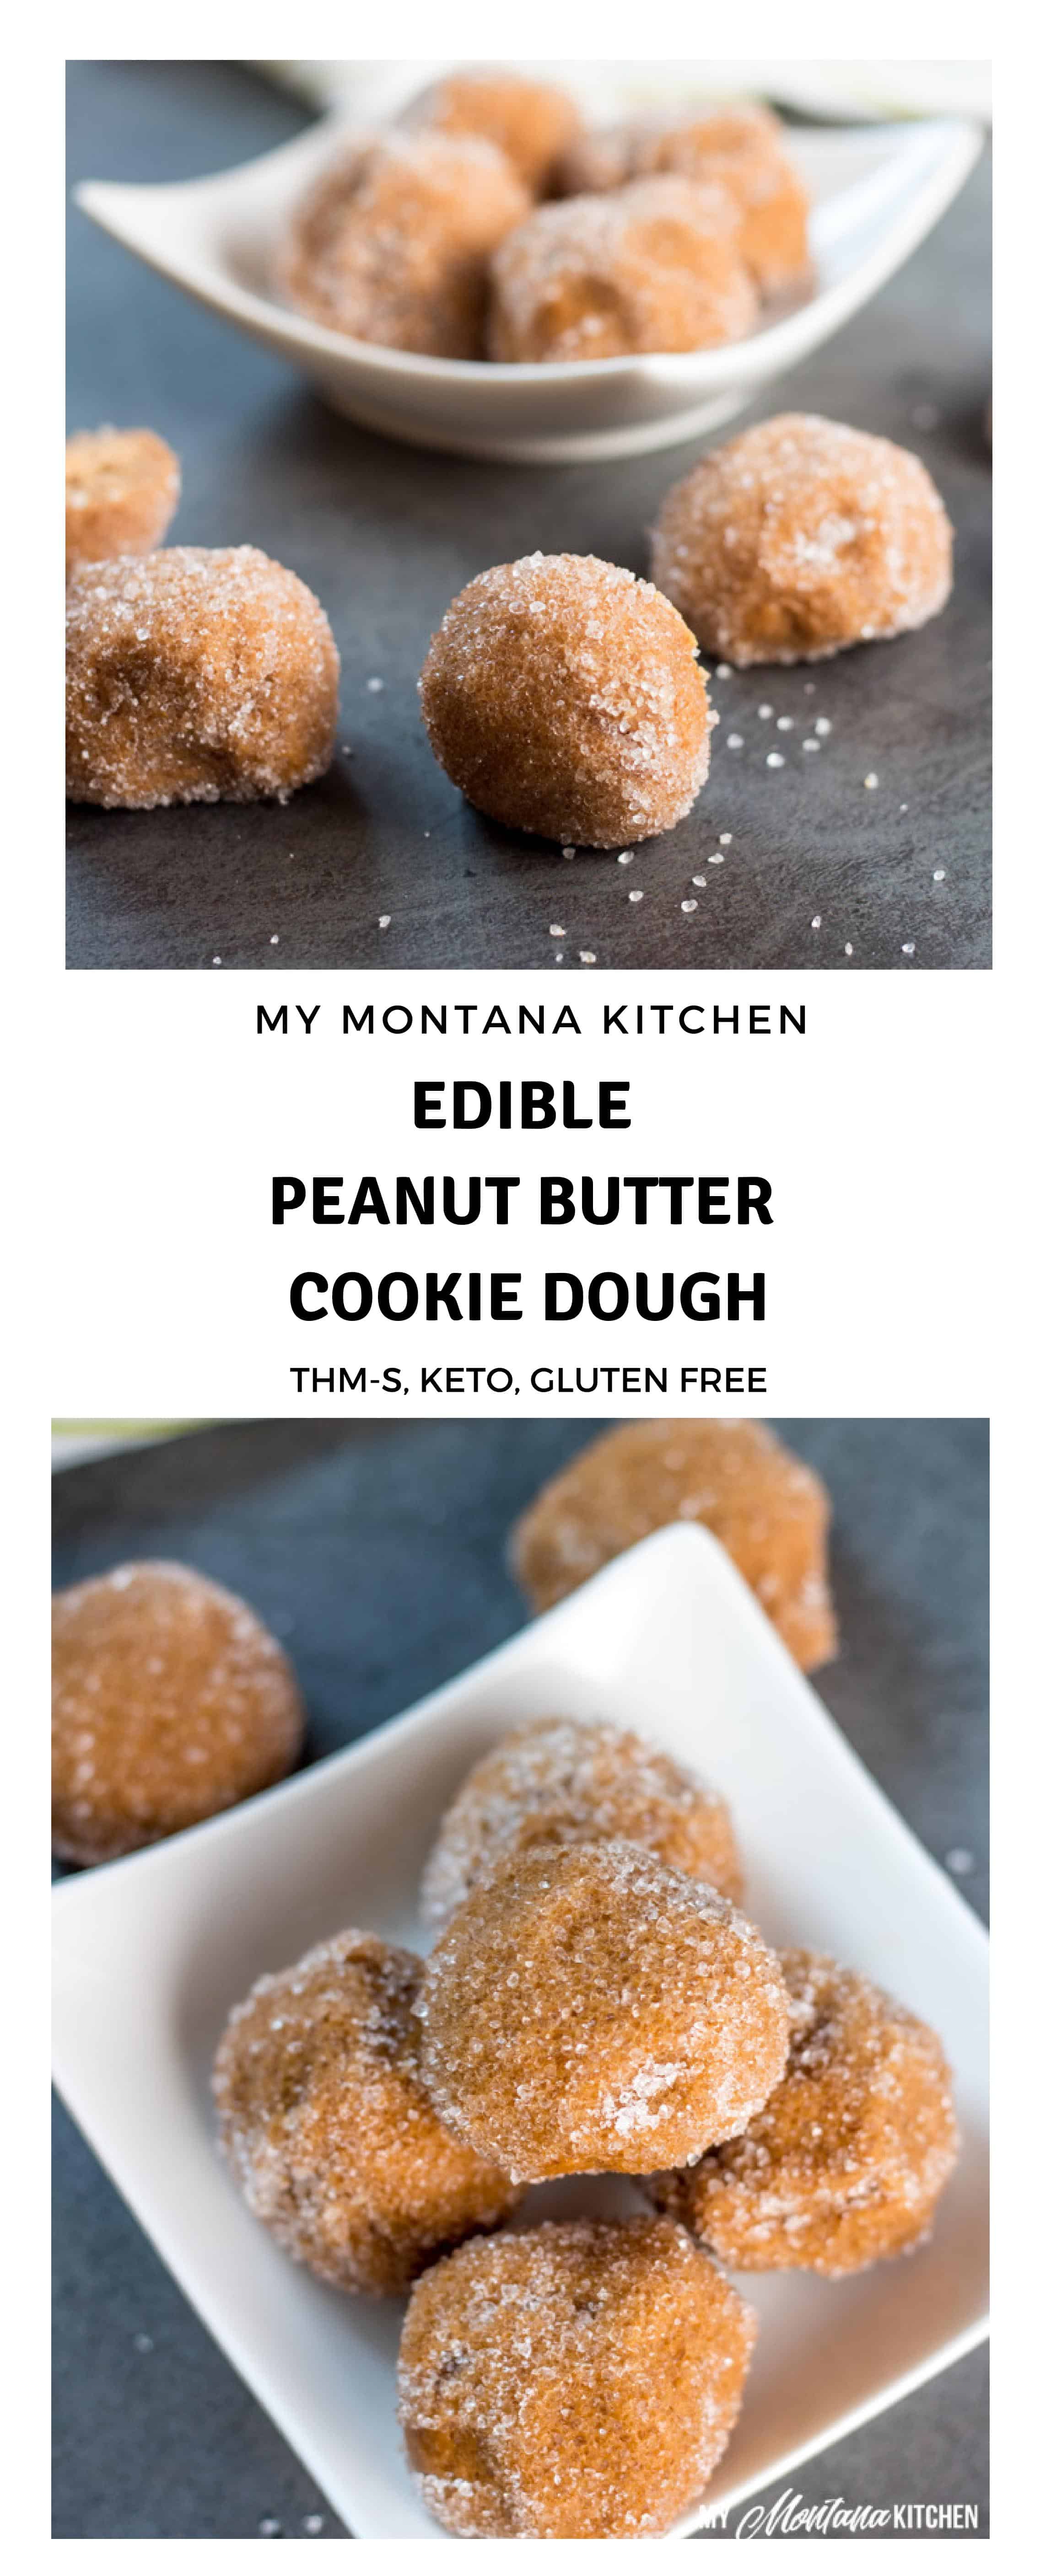 If you love edible cookie dough, you will enjoy these edible Peanut Butter Cookie Dough Bites. Only a handful of ingredients, and about three minutes and you have a delicious, and easy sugar free dessert recipe. These also work great as a low carb snack or a Trim Healthy Mama S dessert. #ediblecookiedough #cookiedough #peanutbutter #peanutflour #peanutbuttercookiedough #sugarfree #glutenfree #lowcarb #trimhealthymama #thm #thms